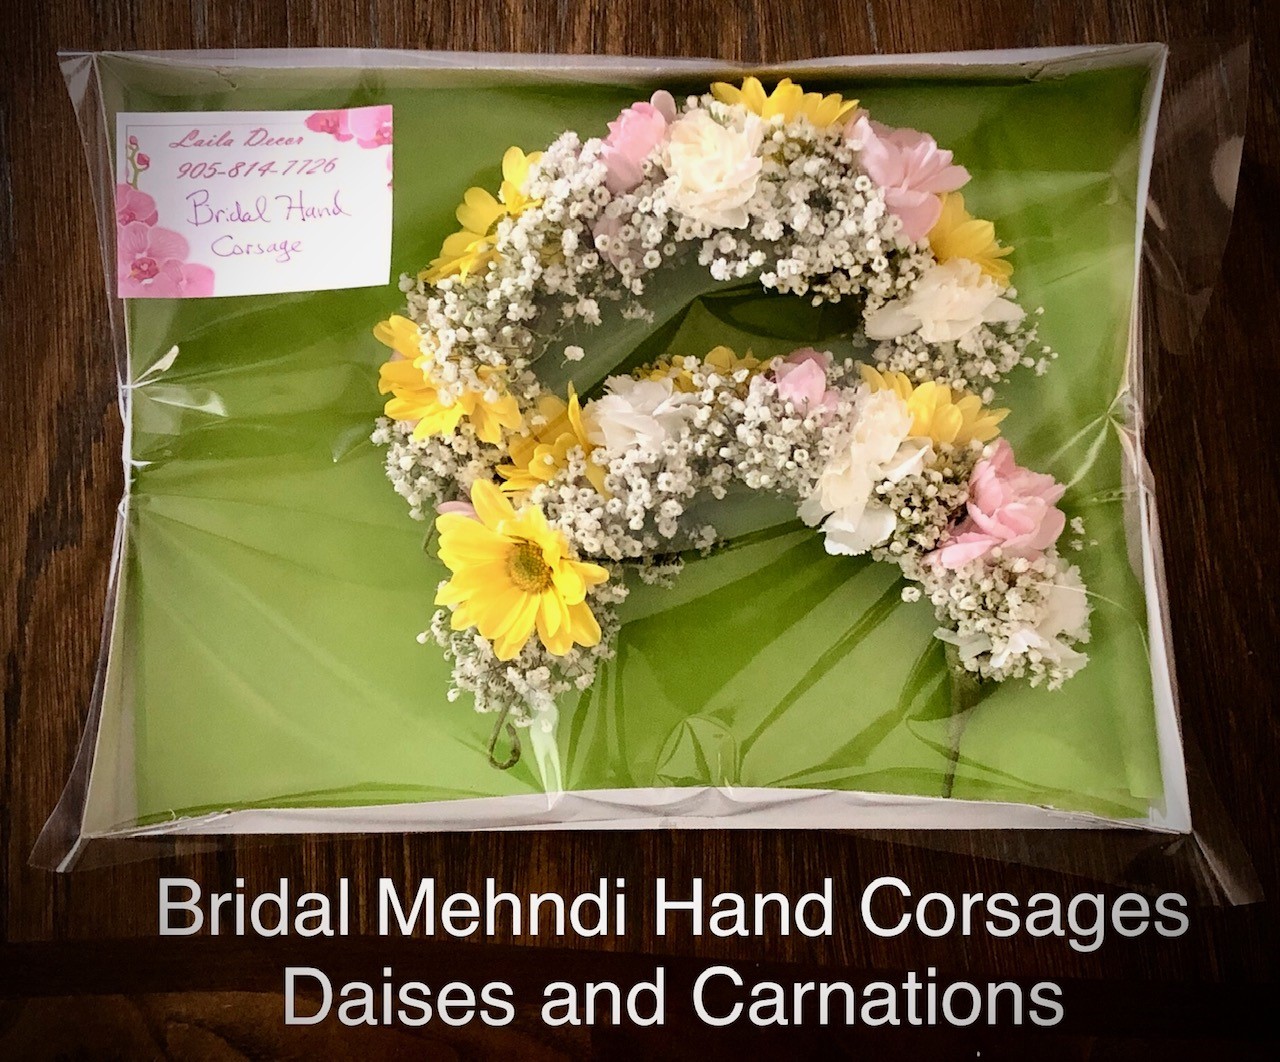 $22.50  each Bridal hand corsage daisies and carnations 